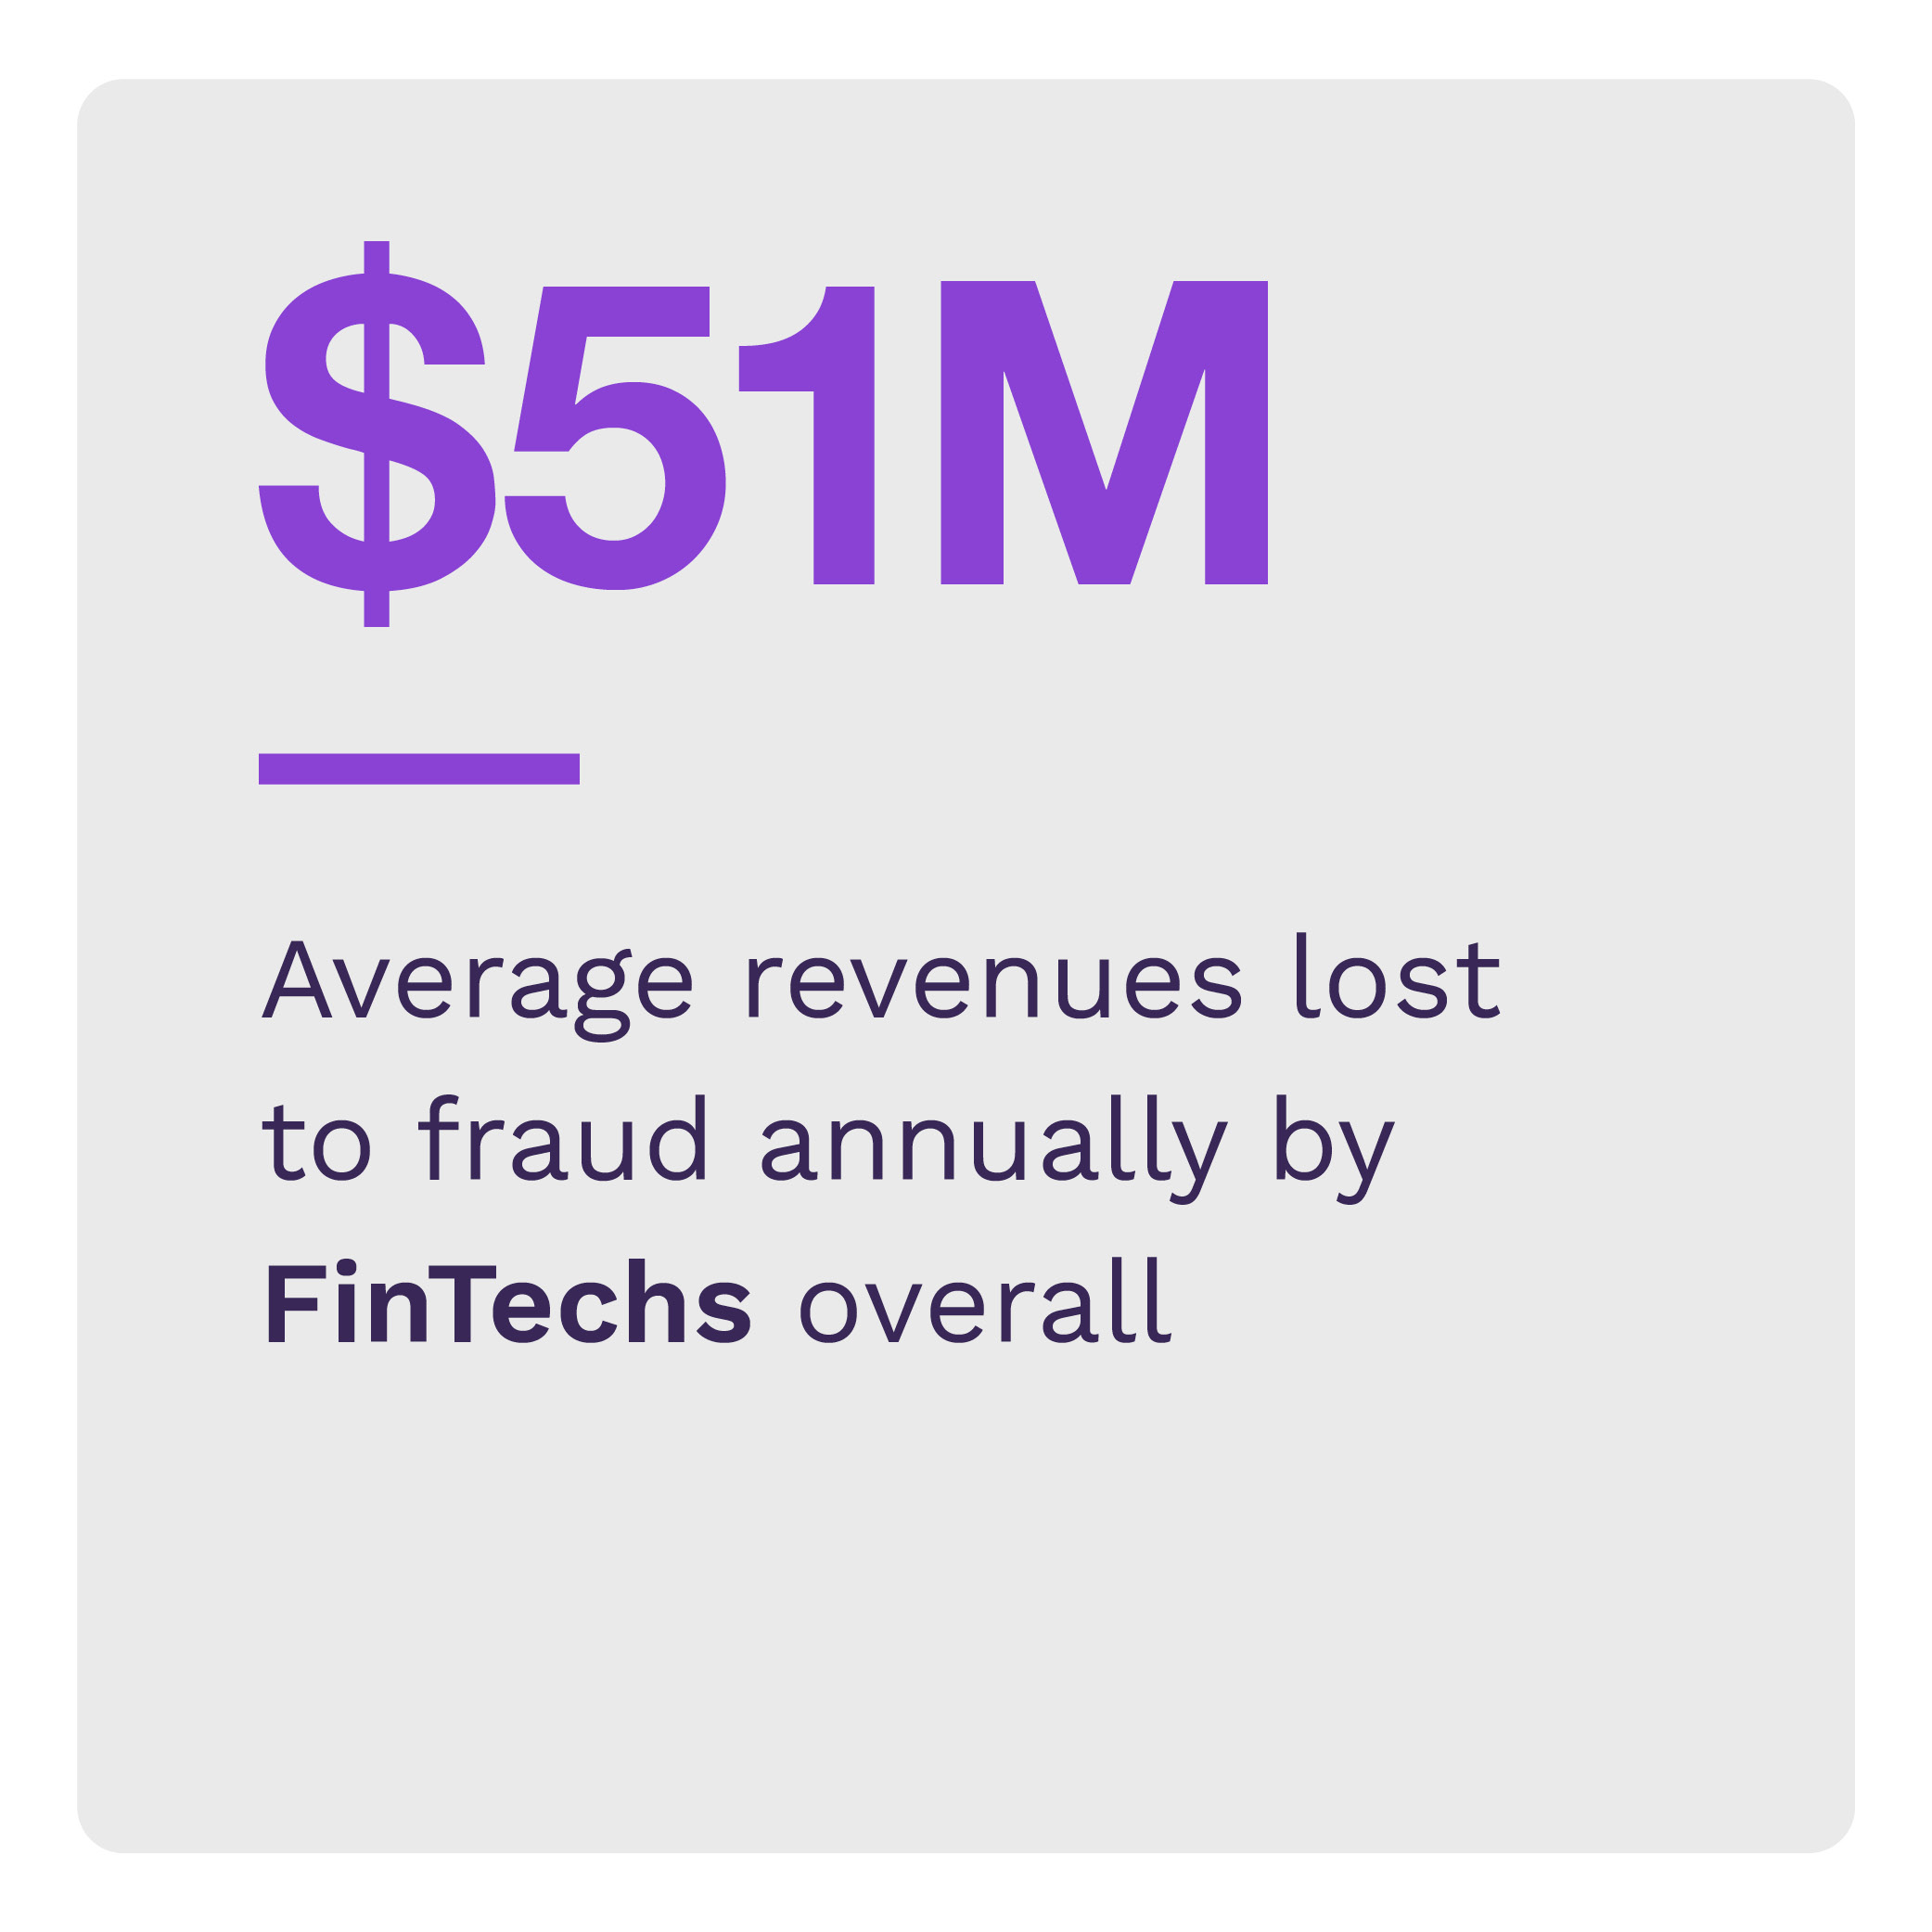 $51M: Average revenues lost to fraud annually by FinTechs overall